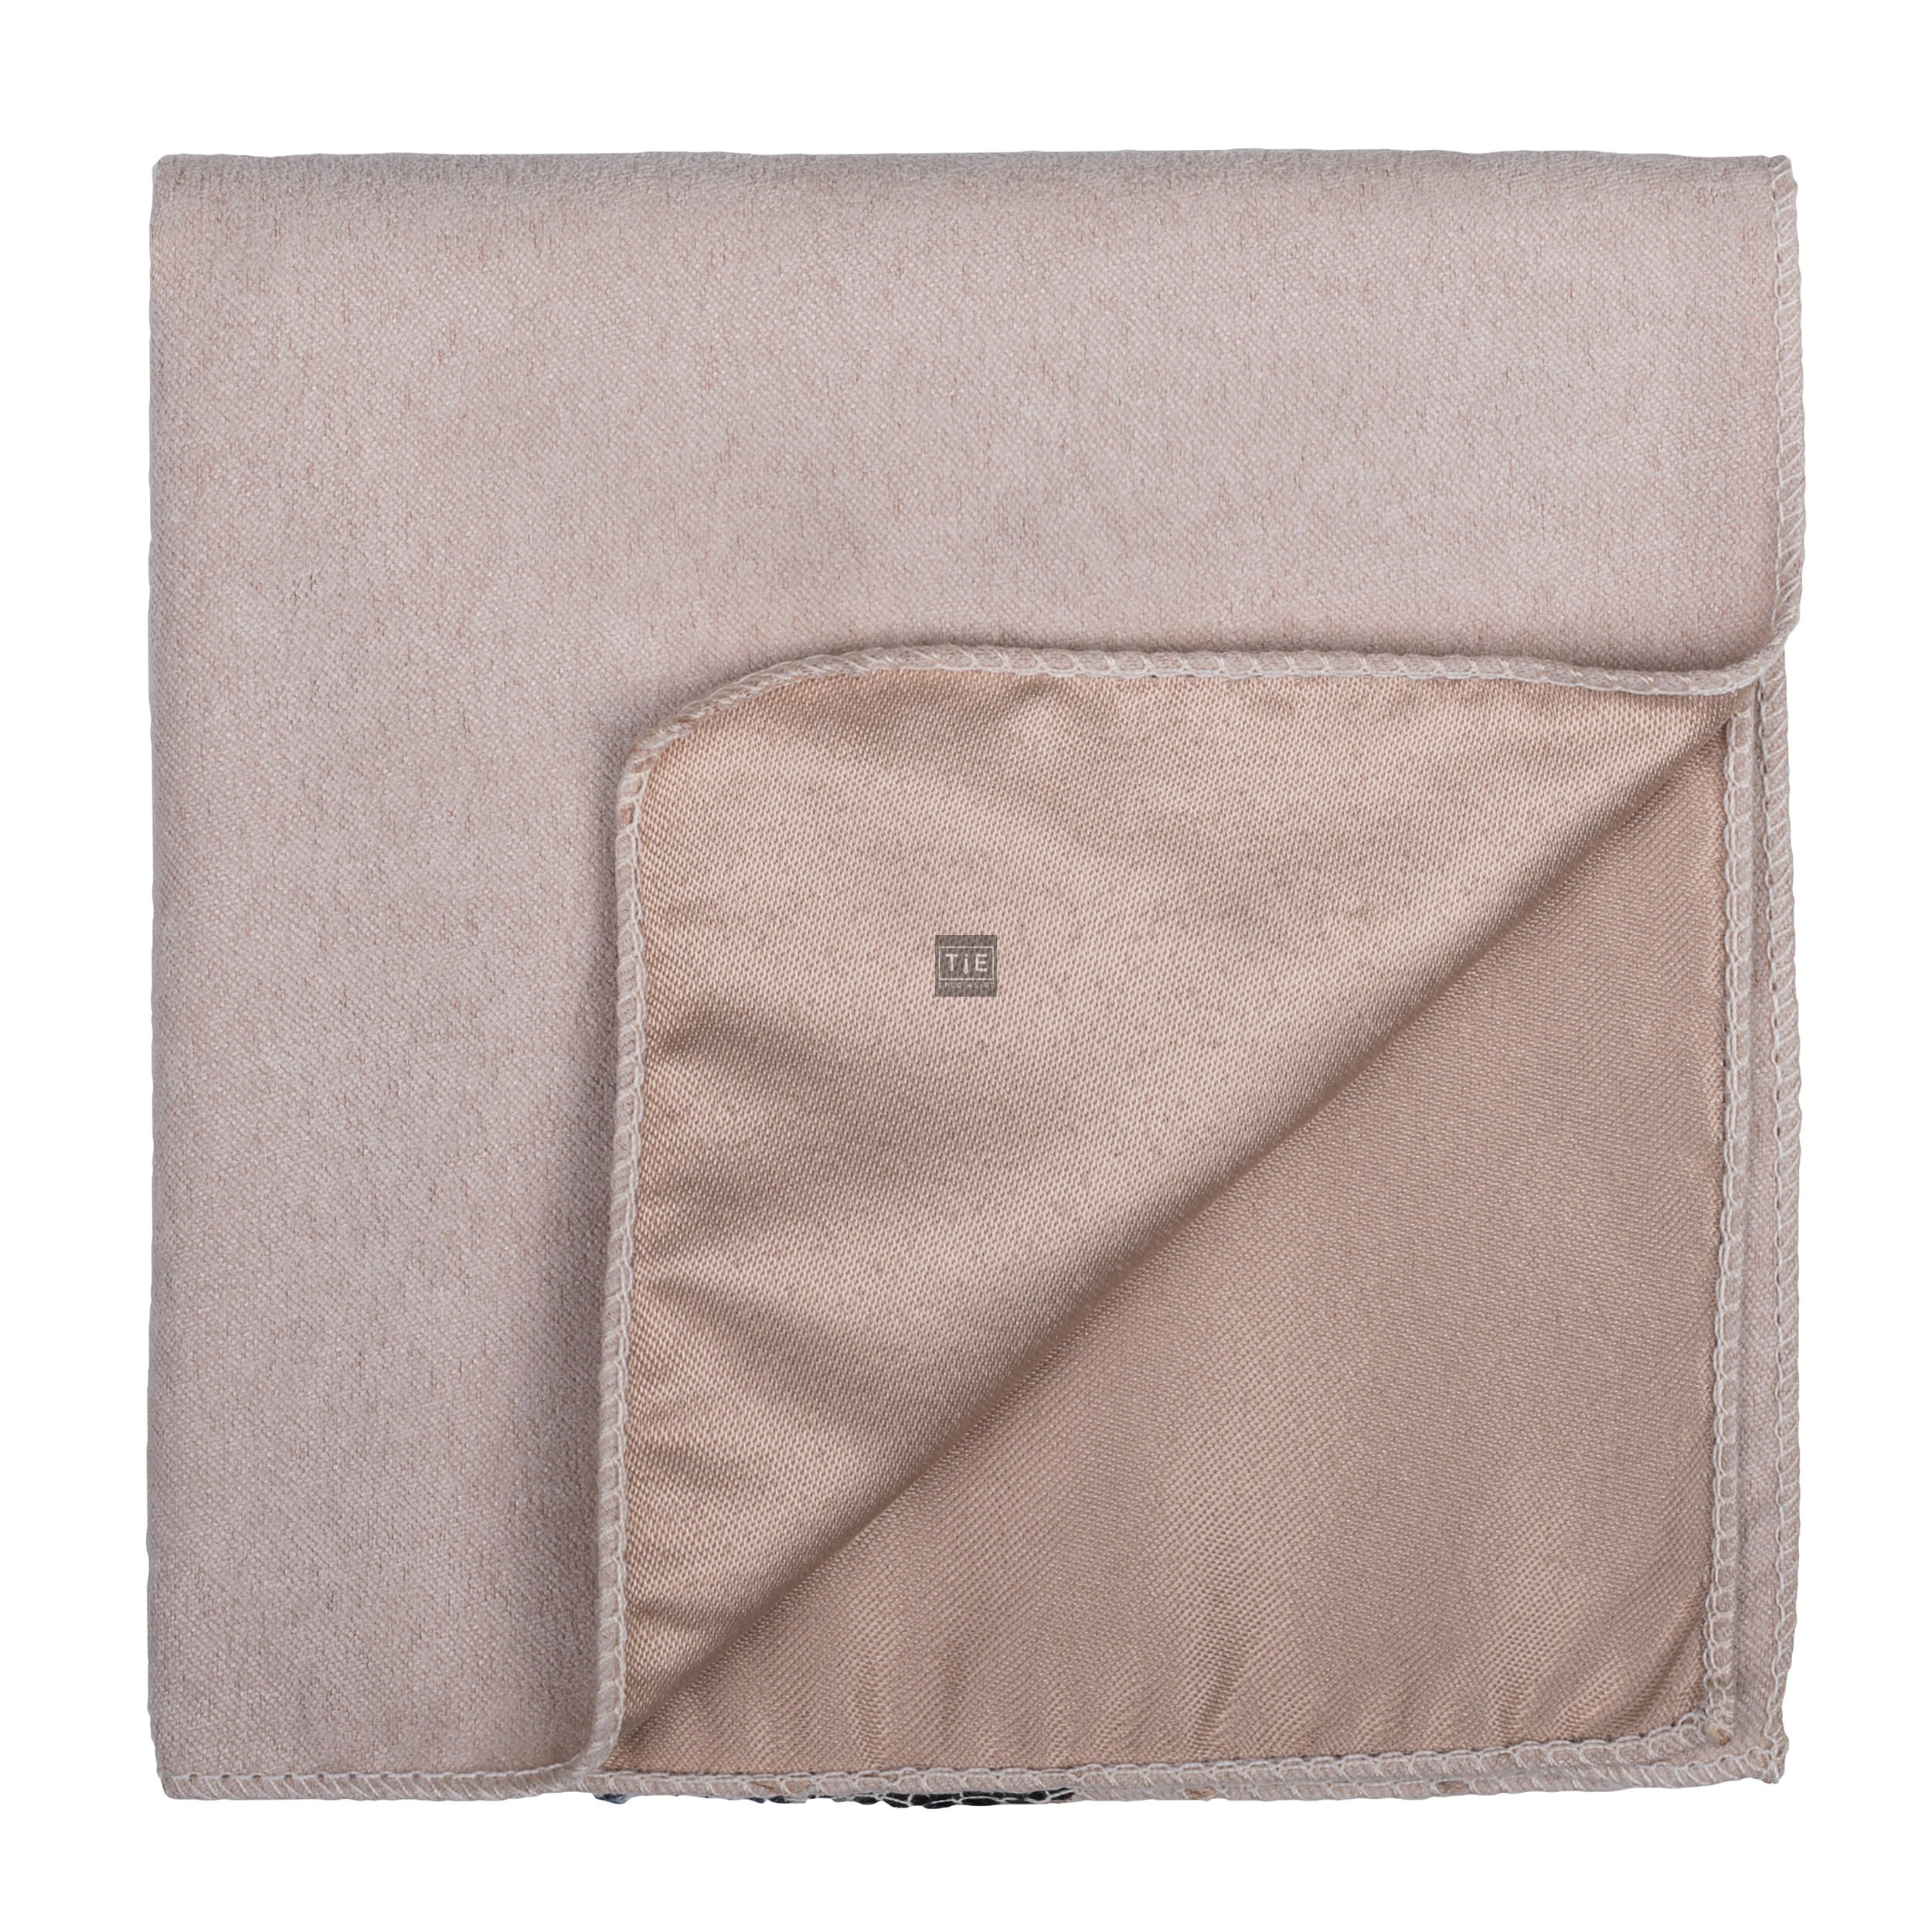 Mellow Buff Suede Pocket Square